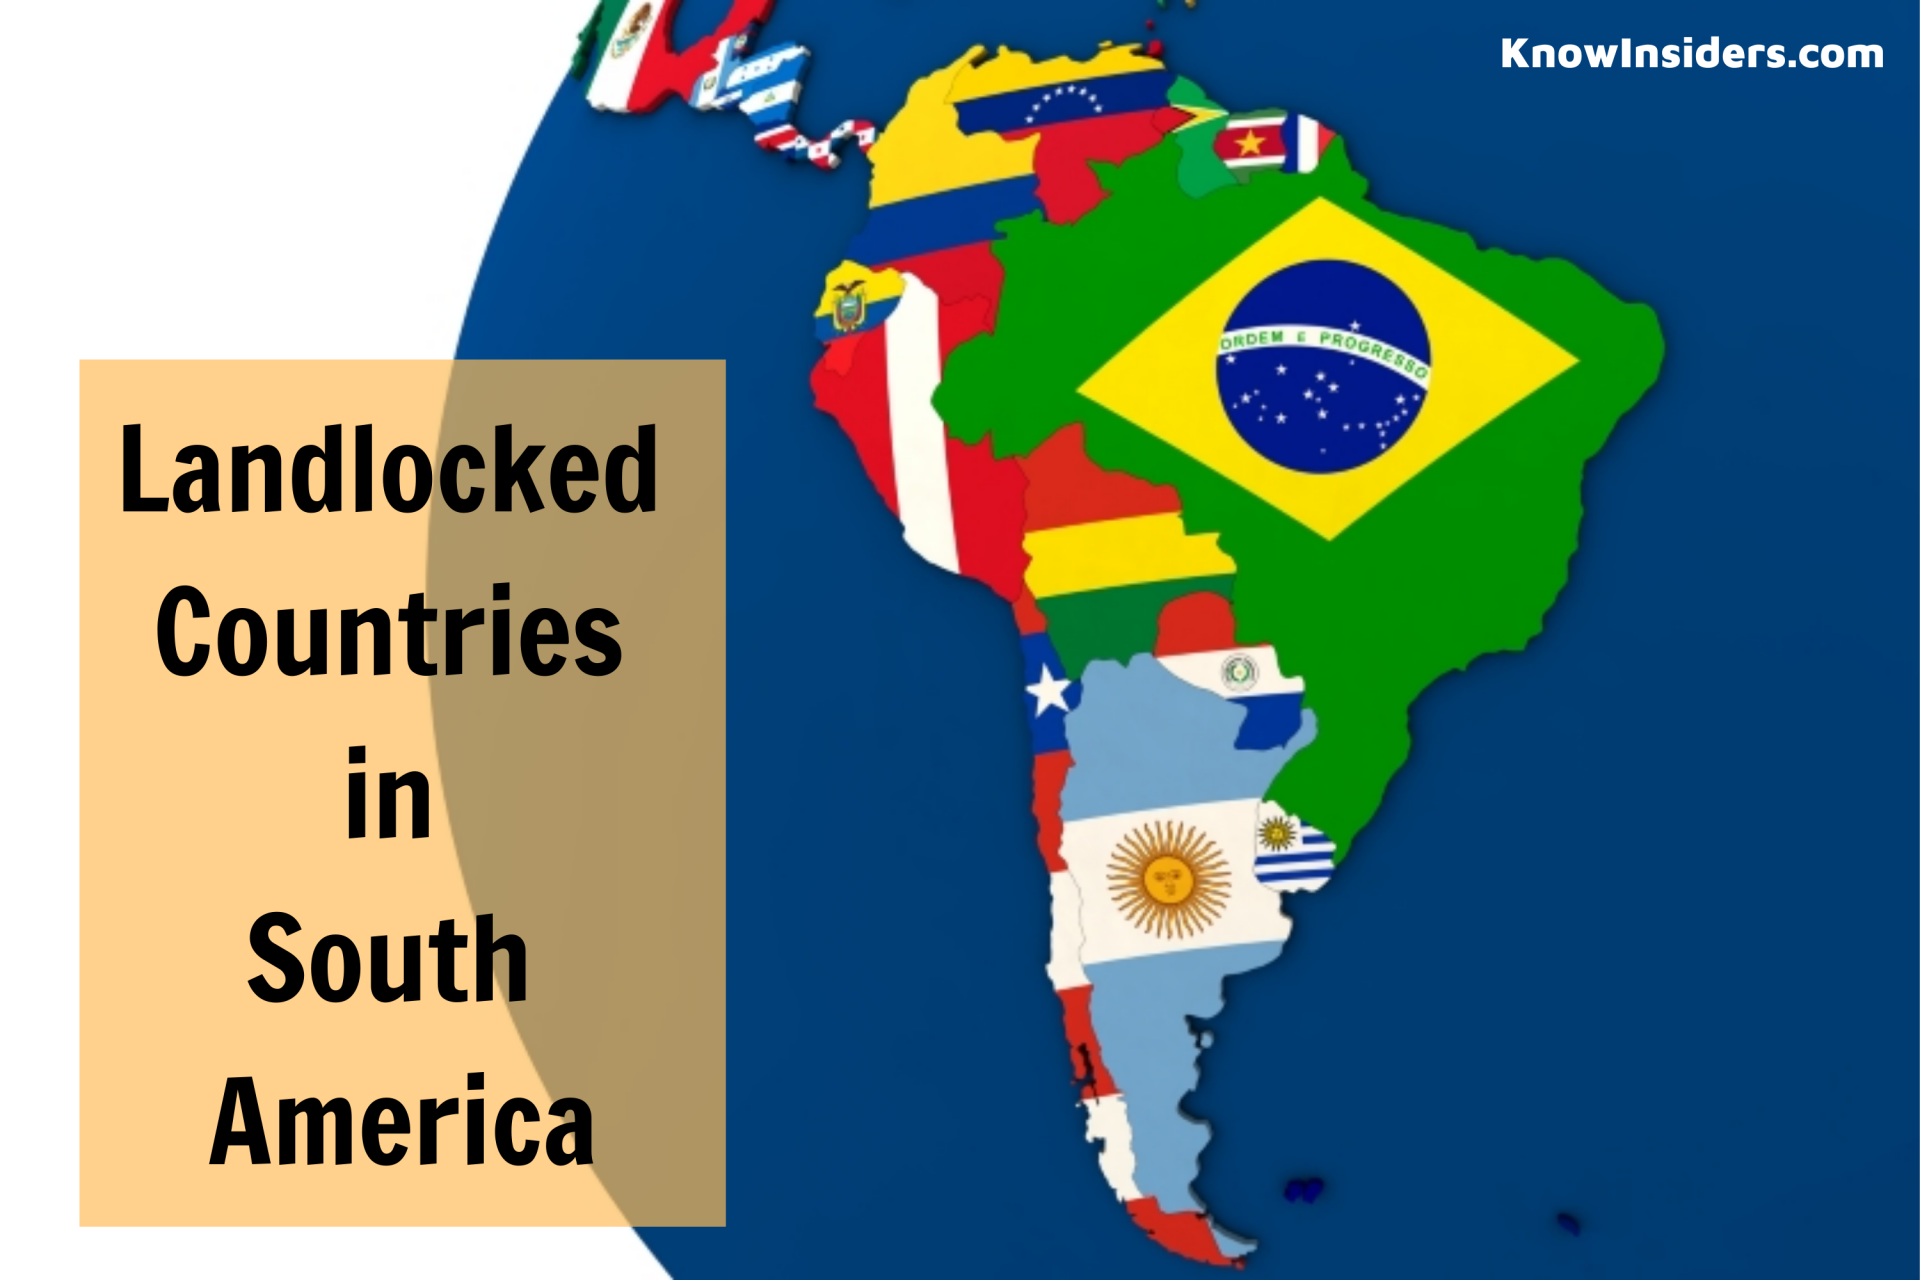 What Are The Landlocked Countries In South America